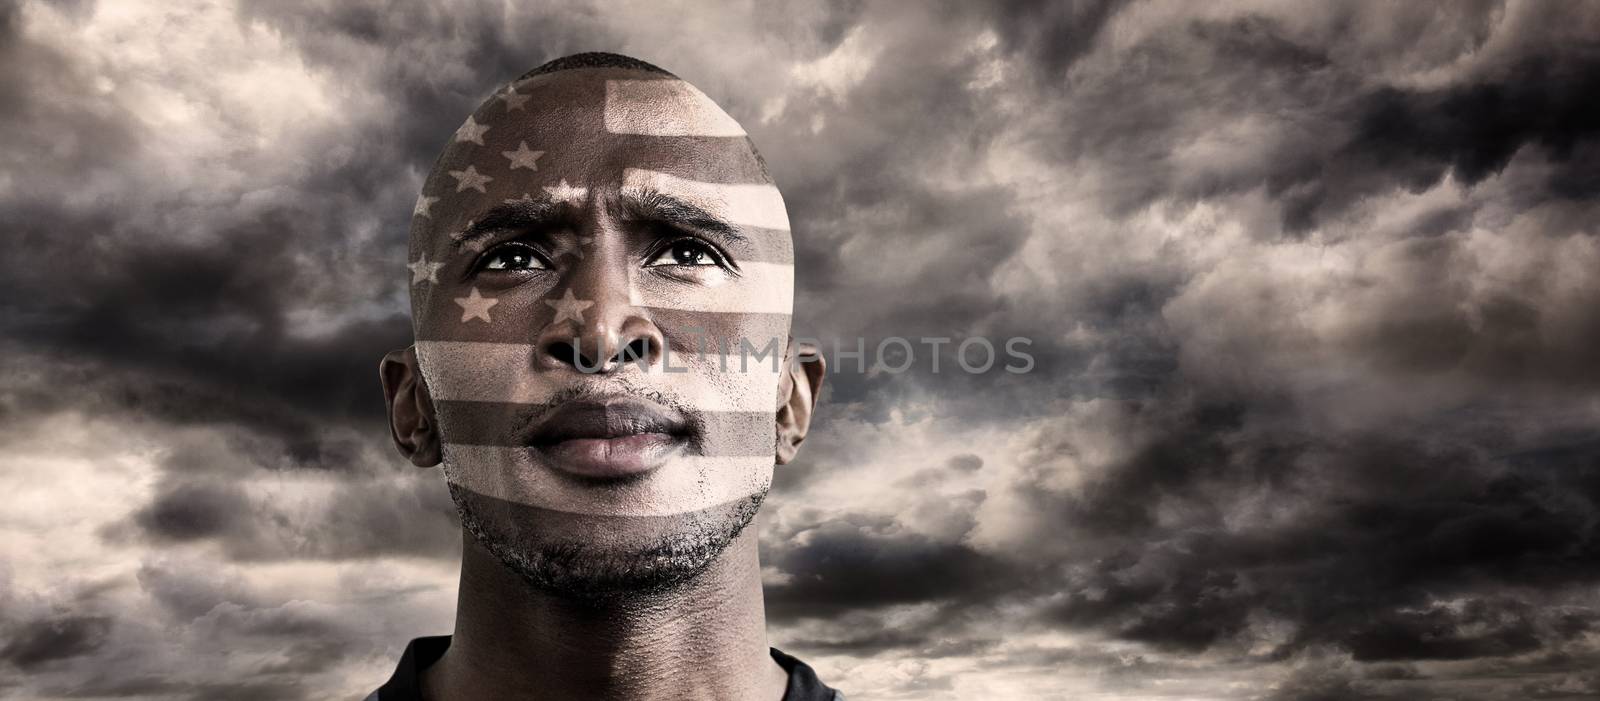 USA rugby player against blue sky with white clouds